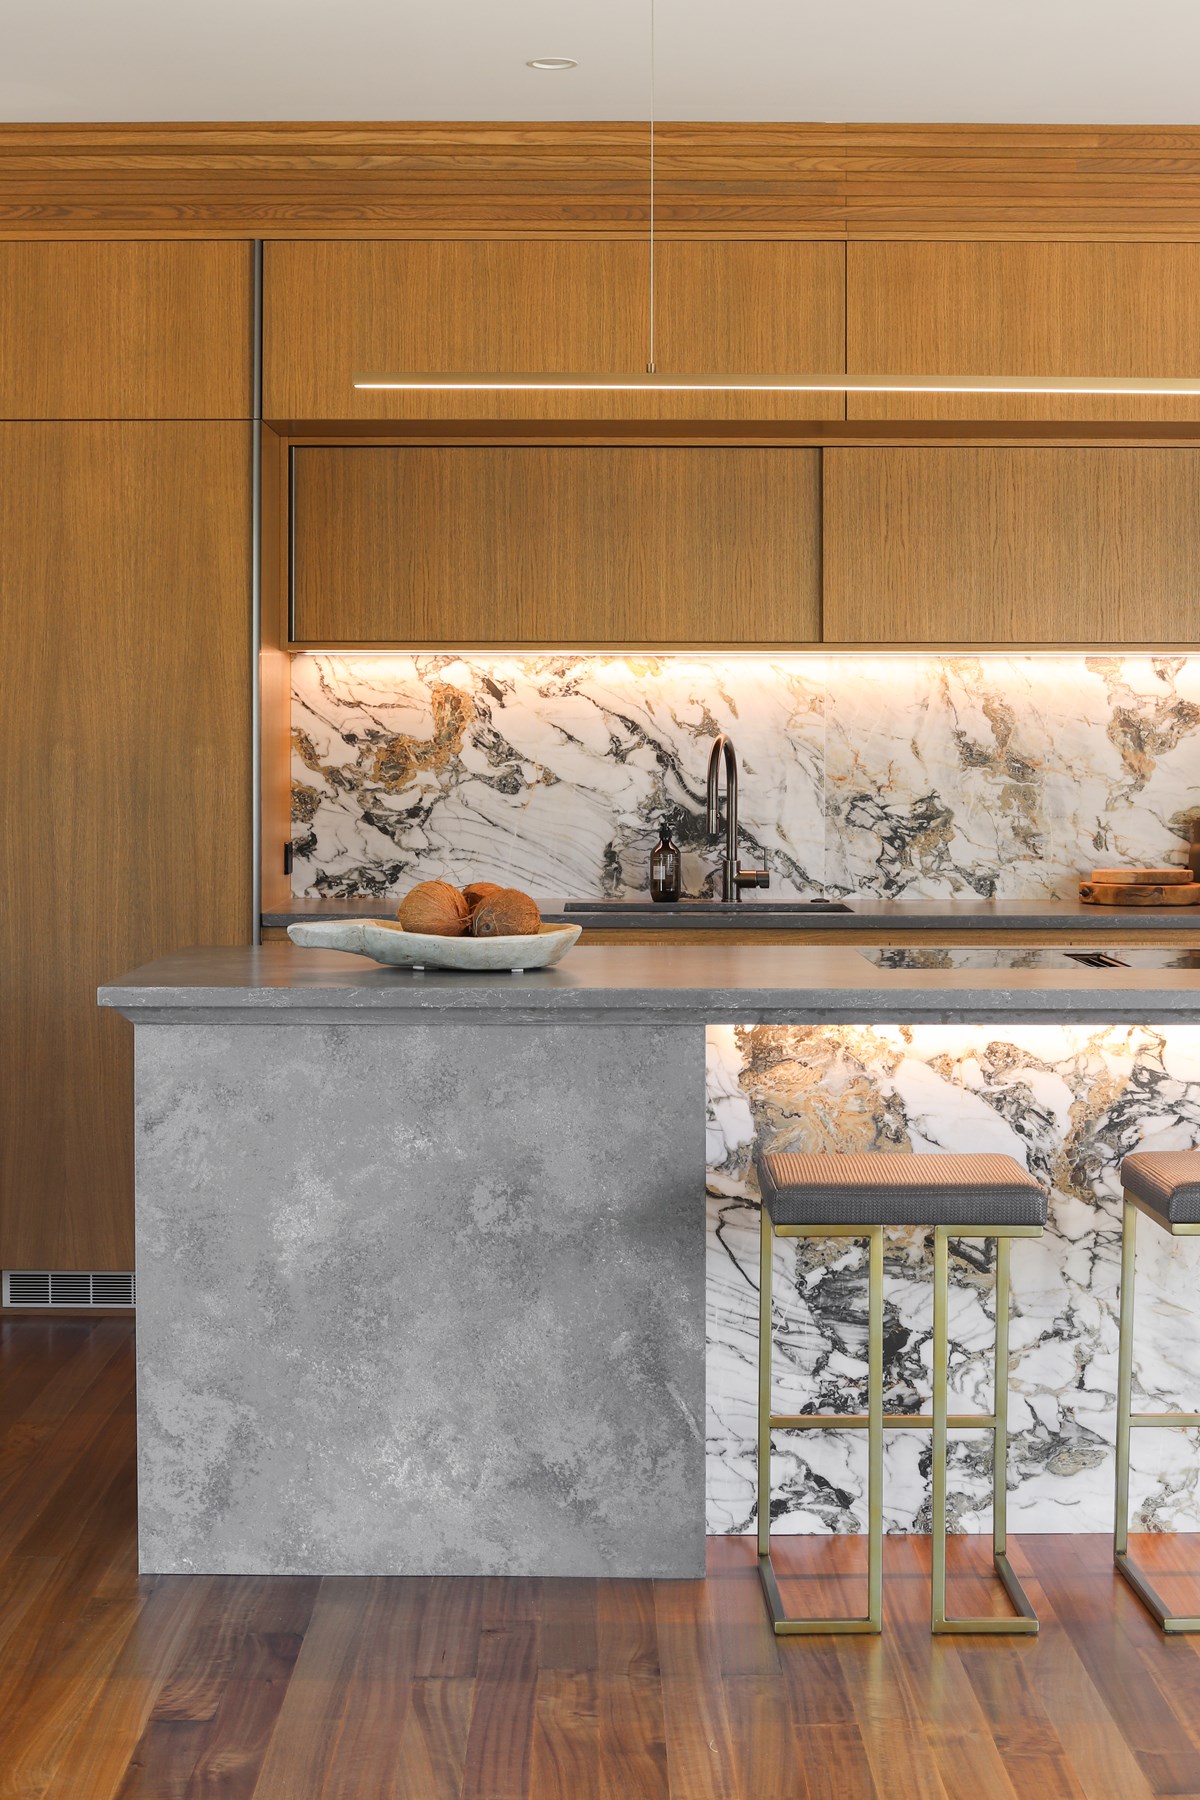 kitchen island with marble splashback and veneer timber cabinetry in a warm stain